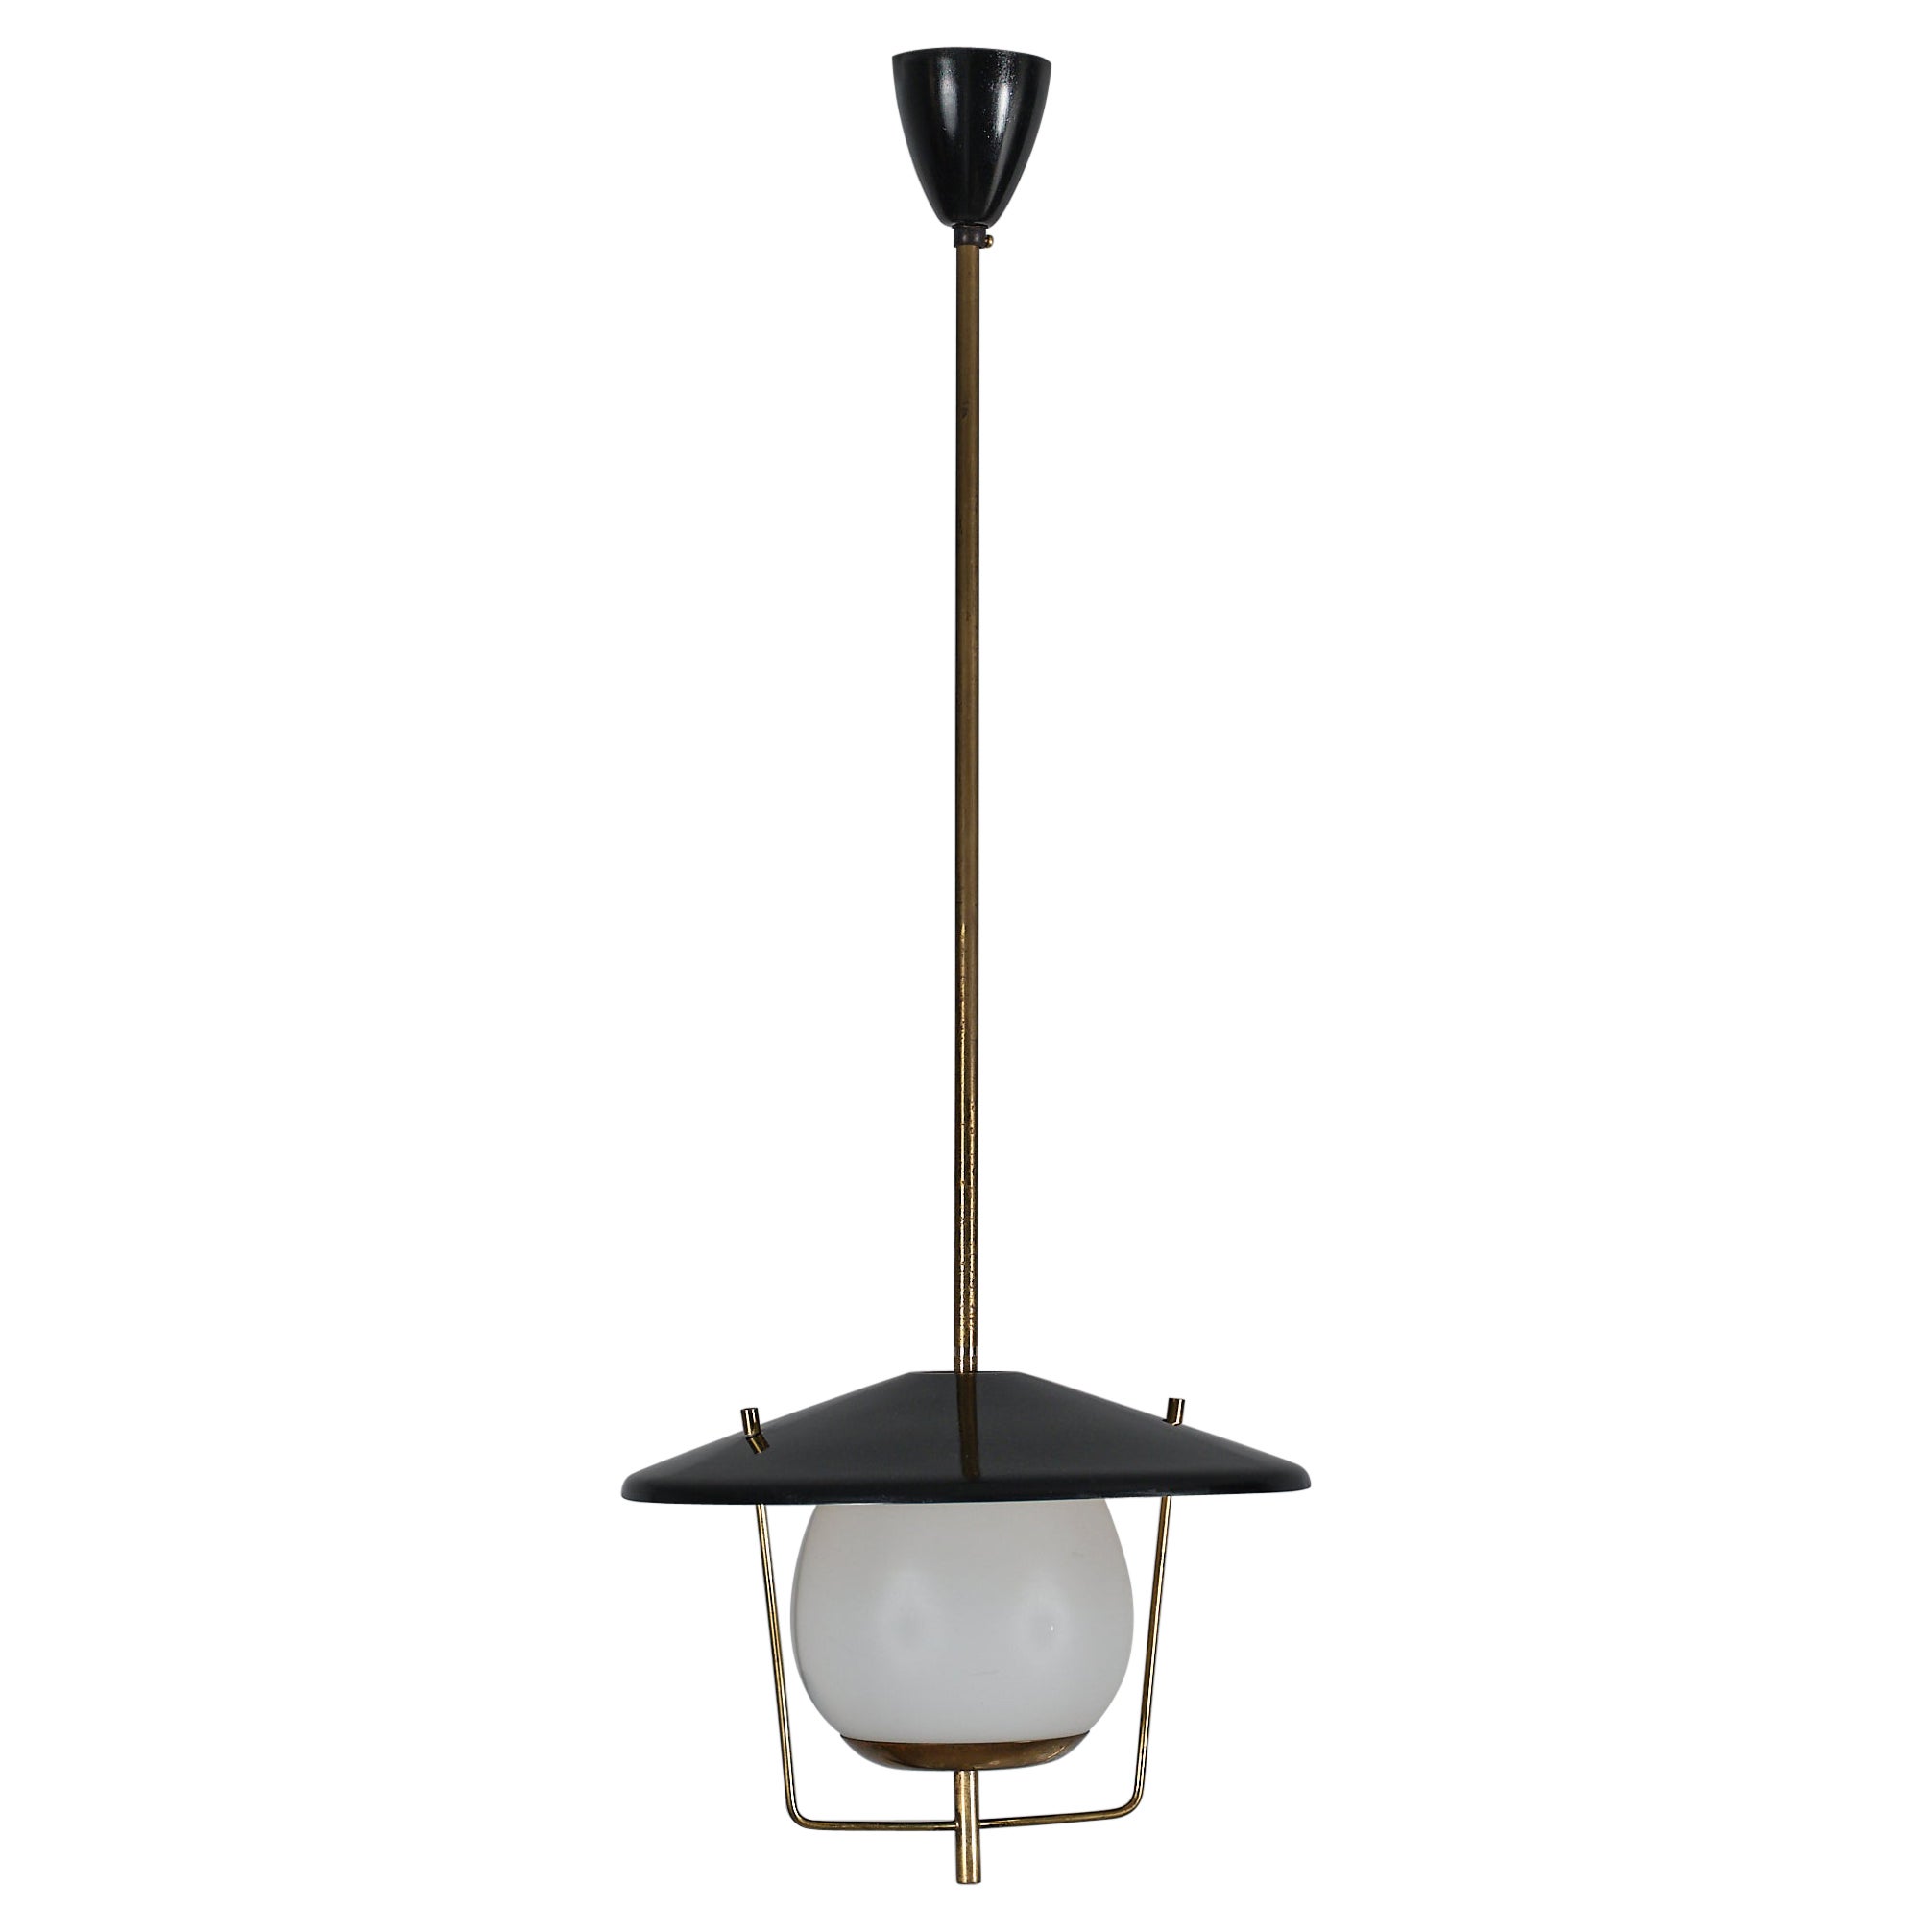 1950s Italian Pendant Lamp - STILNOVO, Brass with Black Shade and Opal Glass For Sale